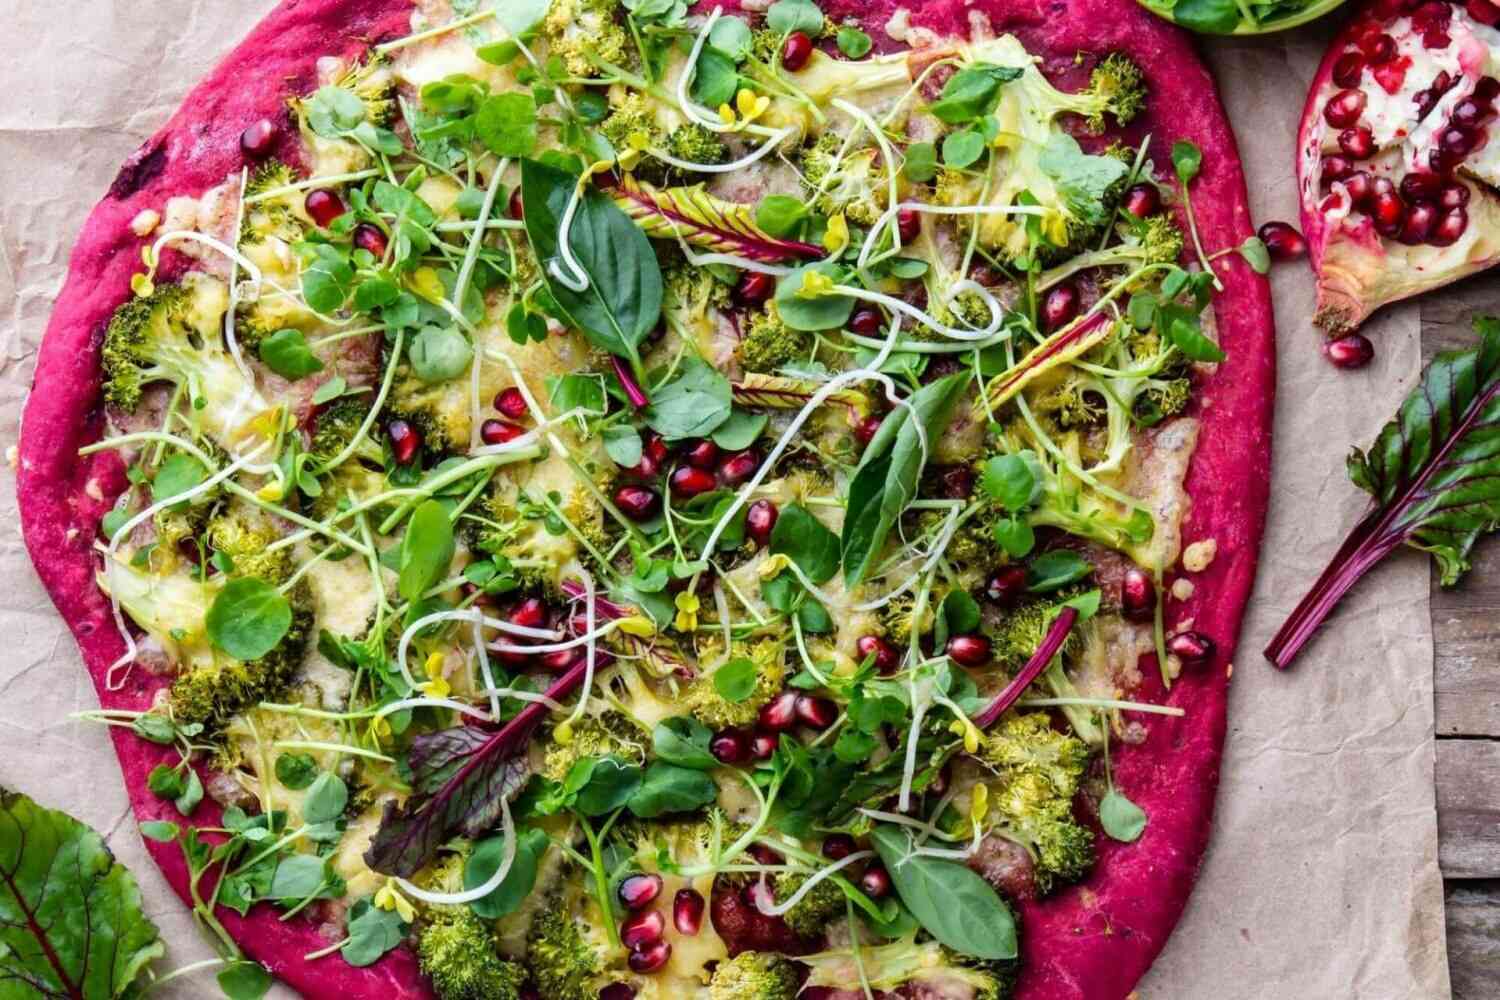 Purple beetroot dough, vegetables and sprouis pizza, Healthy fast food on slate